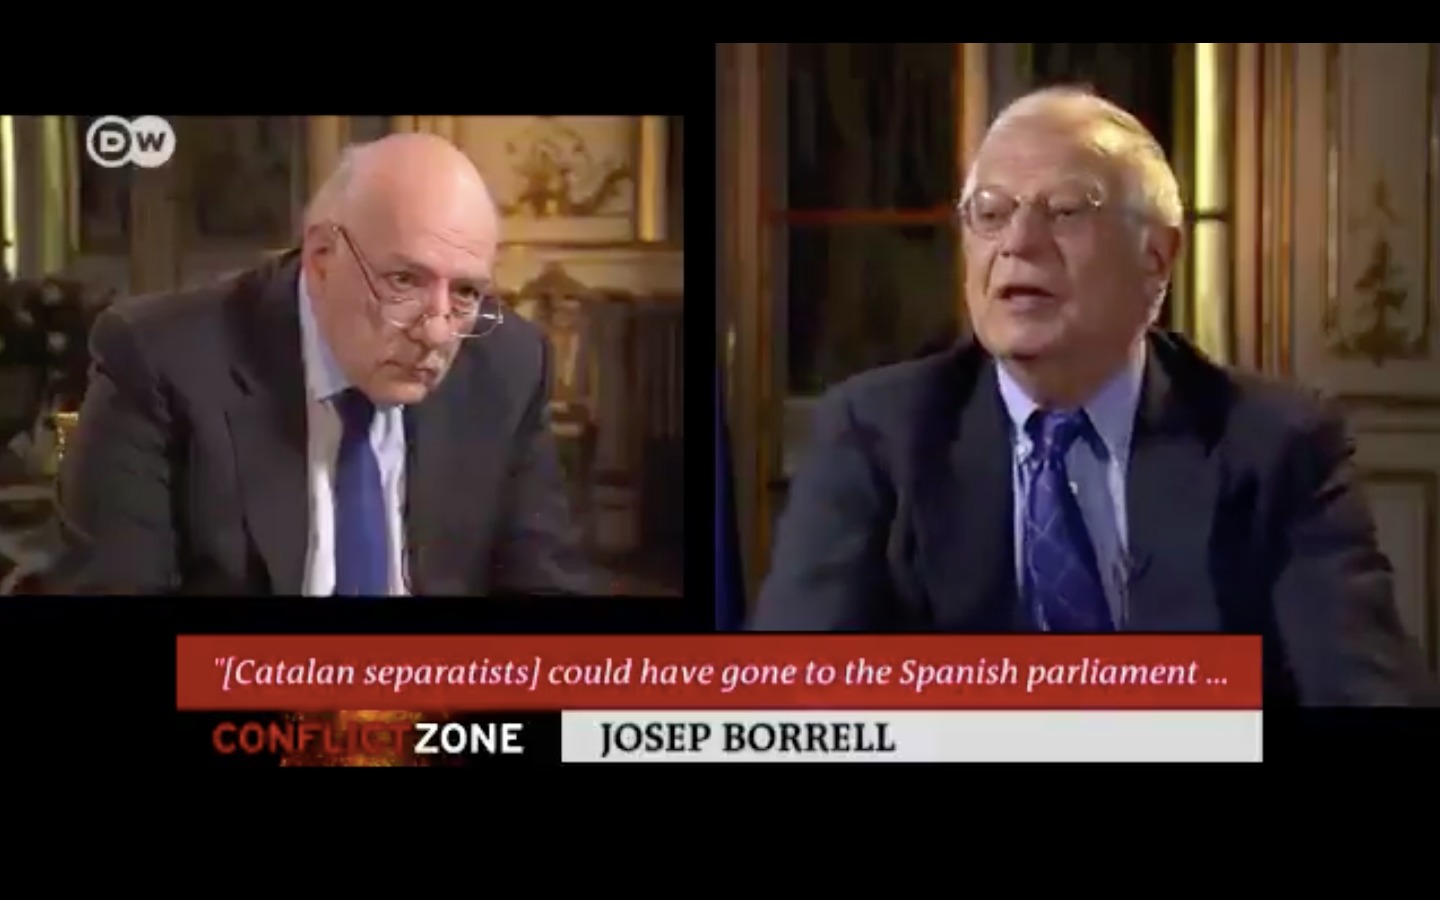 Tim Sebastian (left) and Josep Borrell (right) during the interview in 'The Conflict Zone' (screenshot Deutsche Welle)